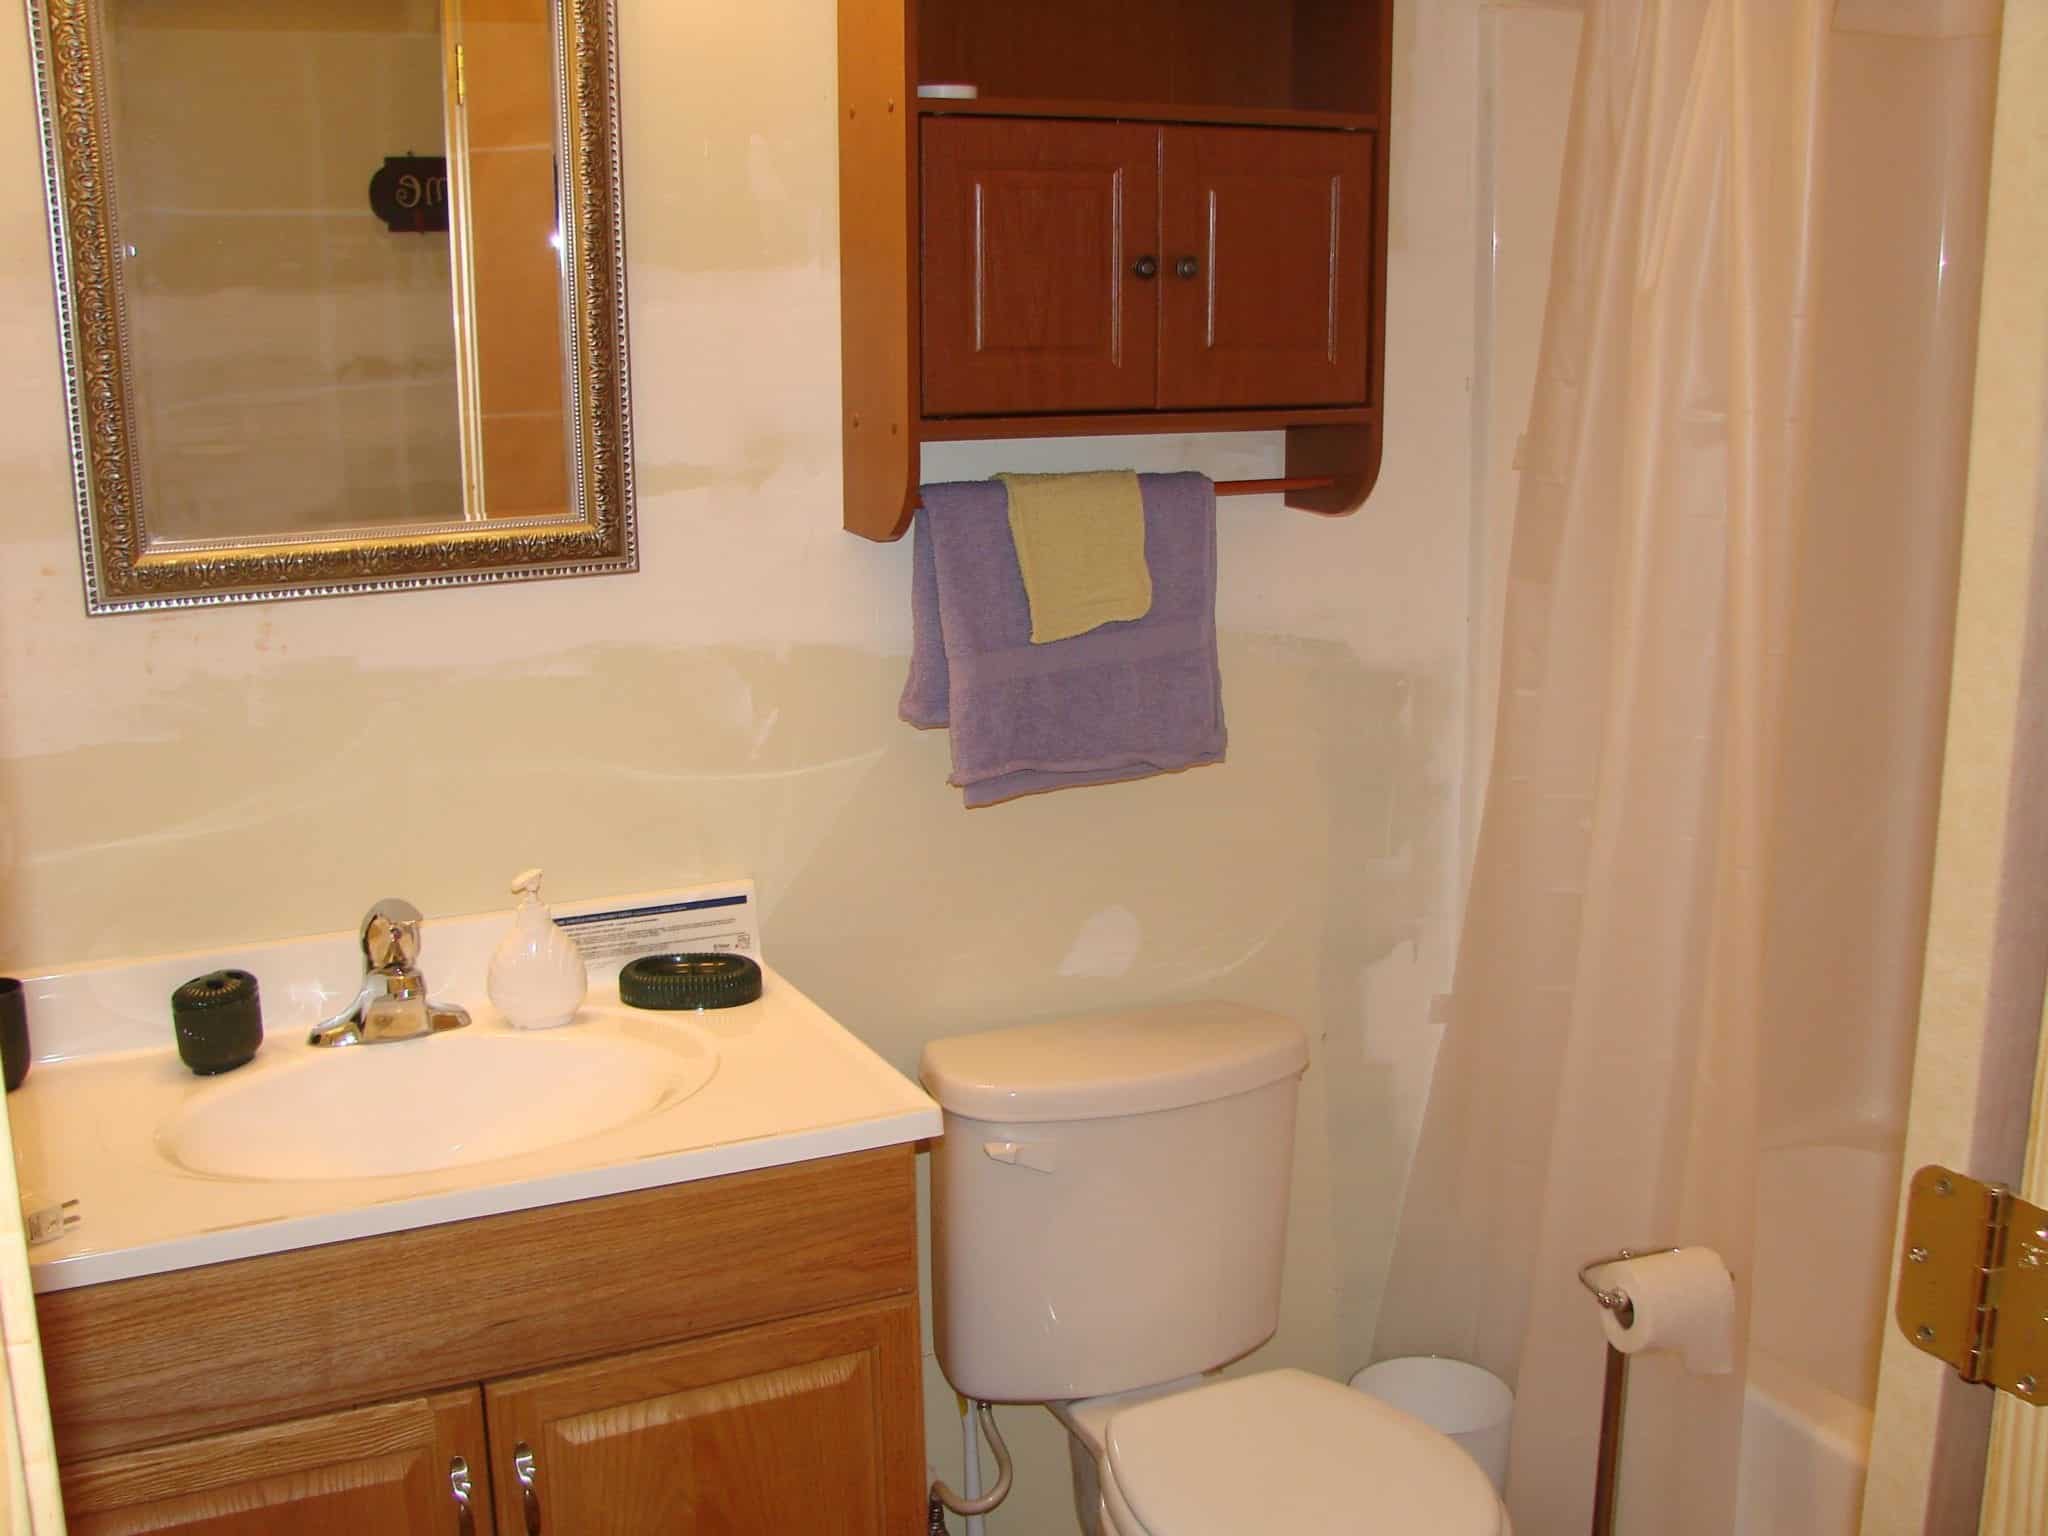 The bathroom in a Murphy North Carolina cabin for rent.